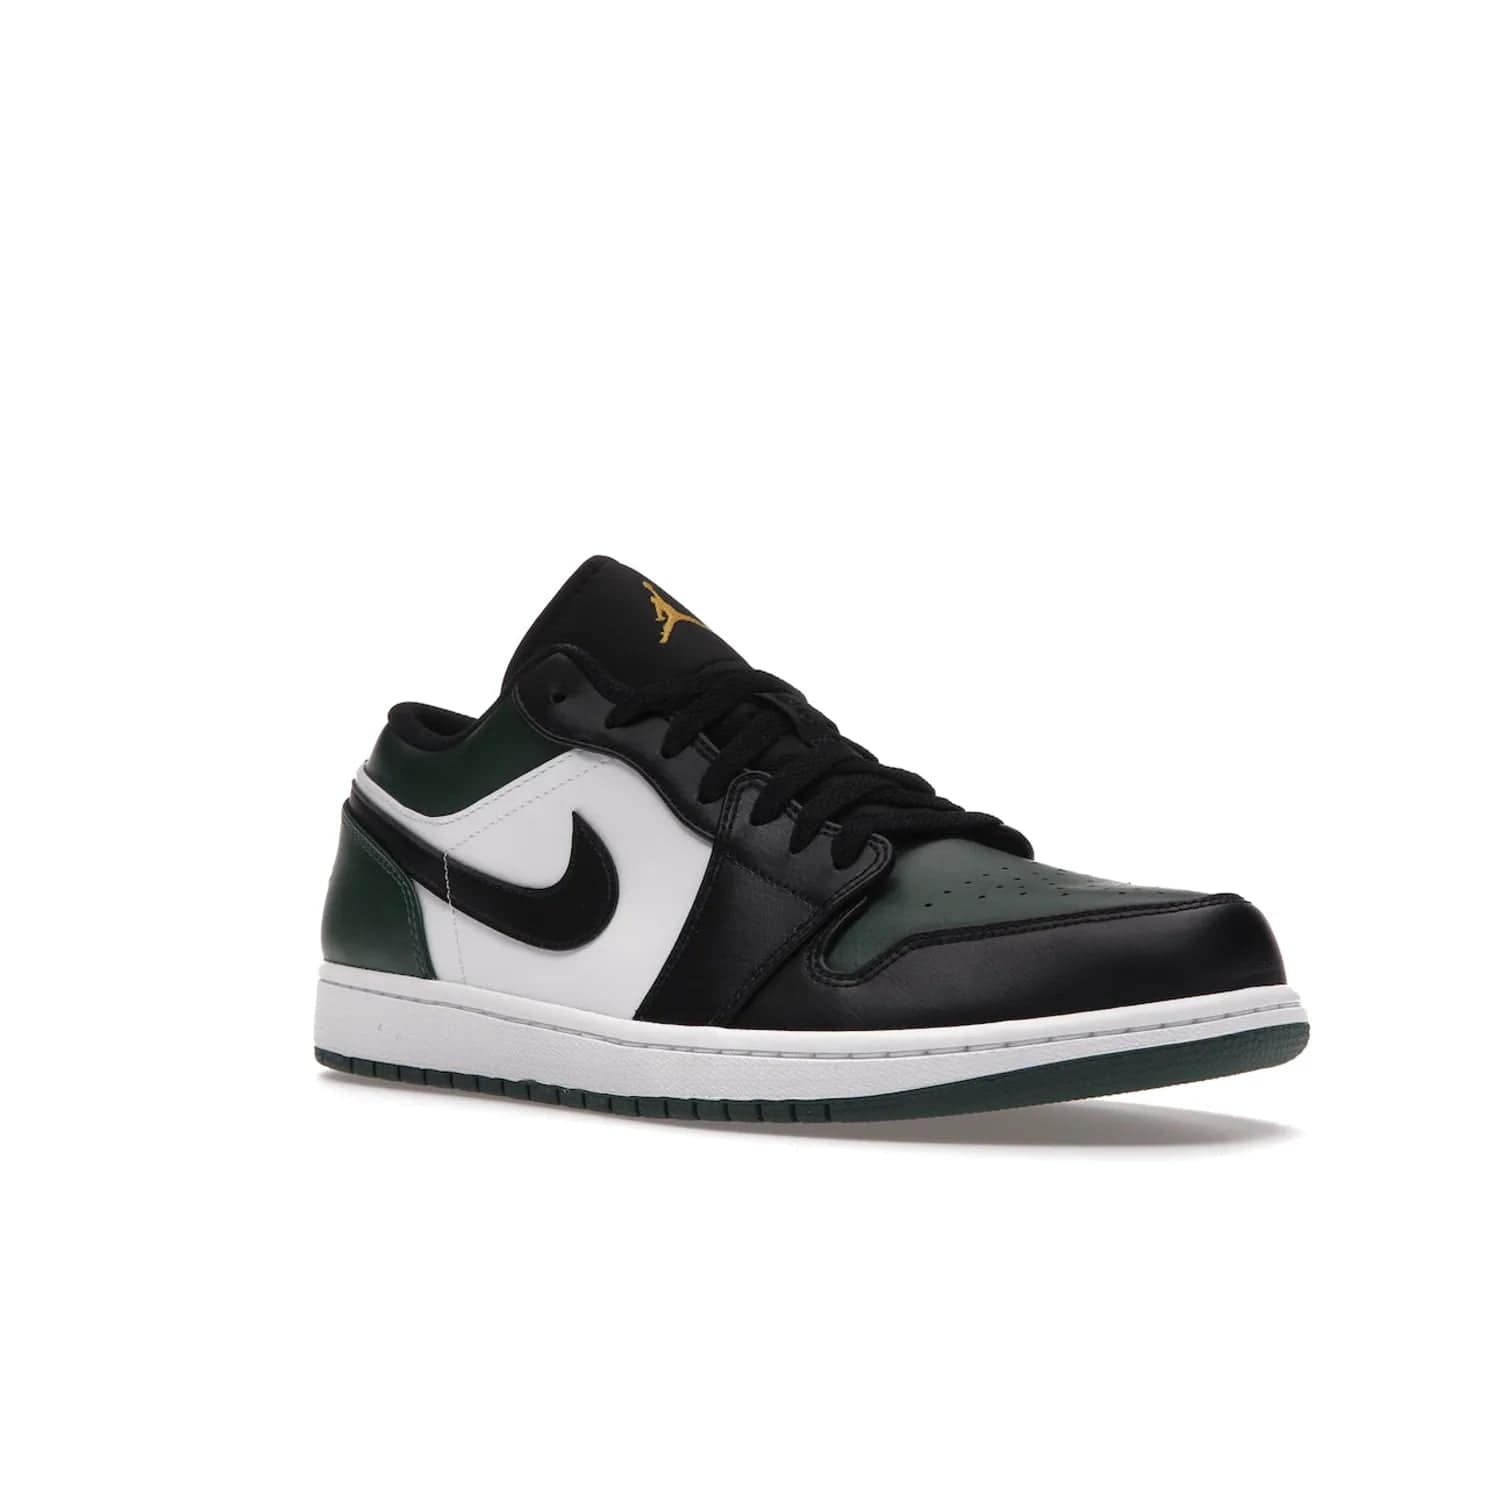 Jordan 1 Low Green Toe - Image 5 - Only at www.BallersClubKickz.com - The Jordan 1 Low Green Toe features white, black and Noble Green leather with black Swoosh. Get the classic Bred Toe-inspired color blocking with green perforated toe box. White and green Air sole completes the design. Released in October 2021 at only $100. Grab your pair now!